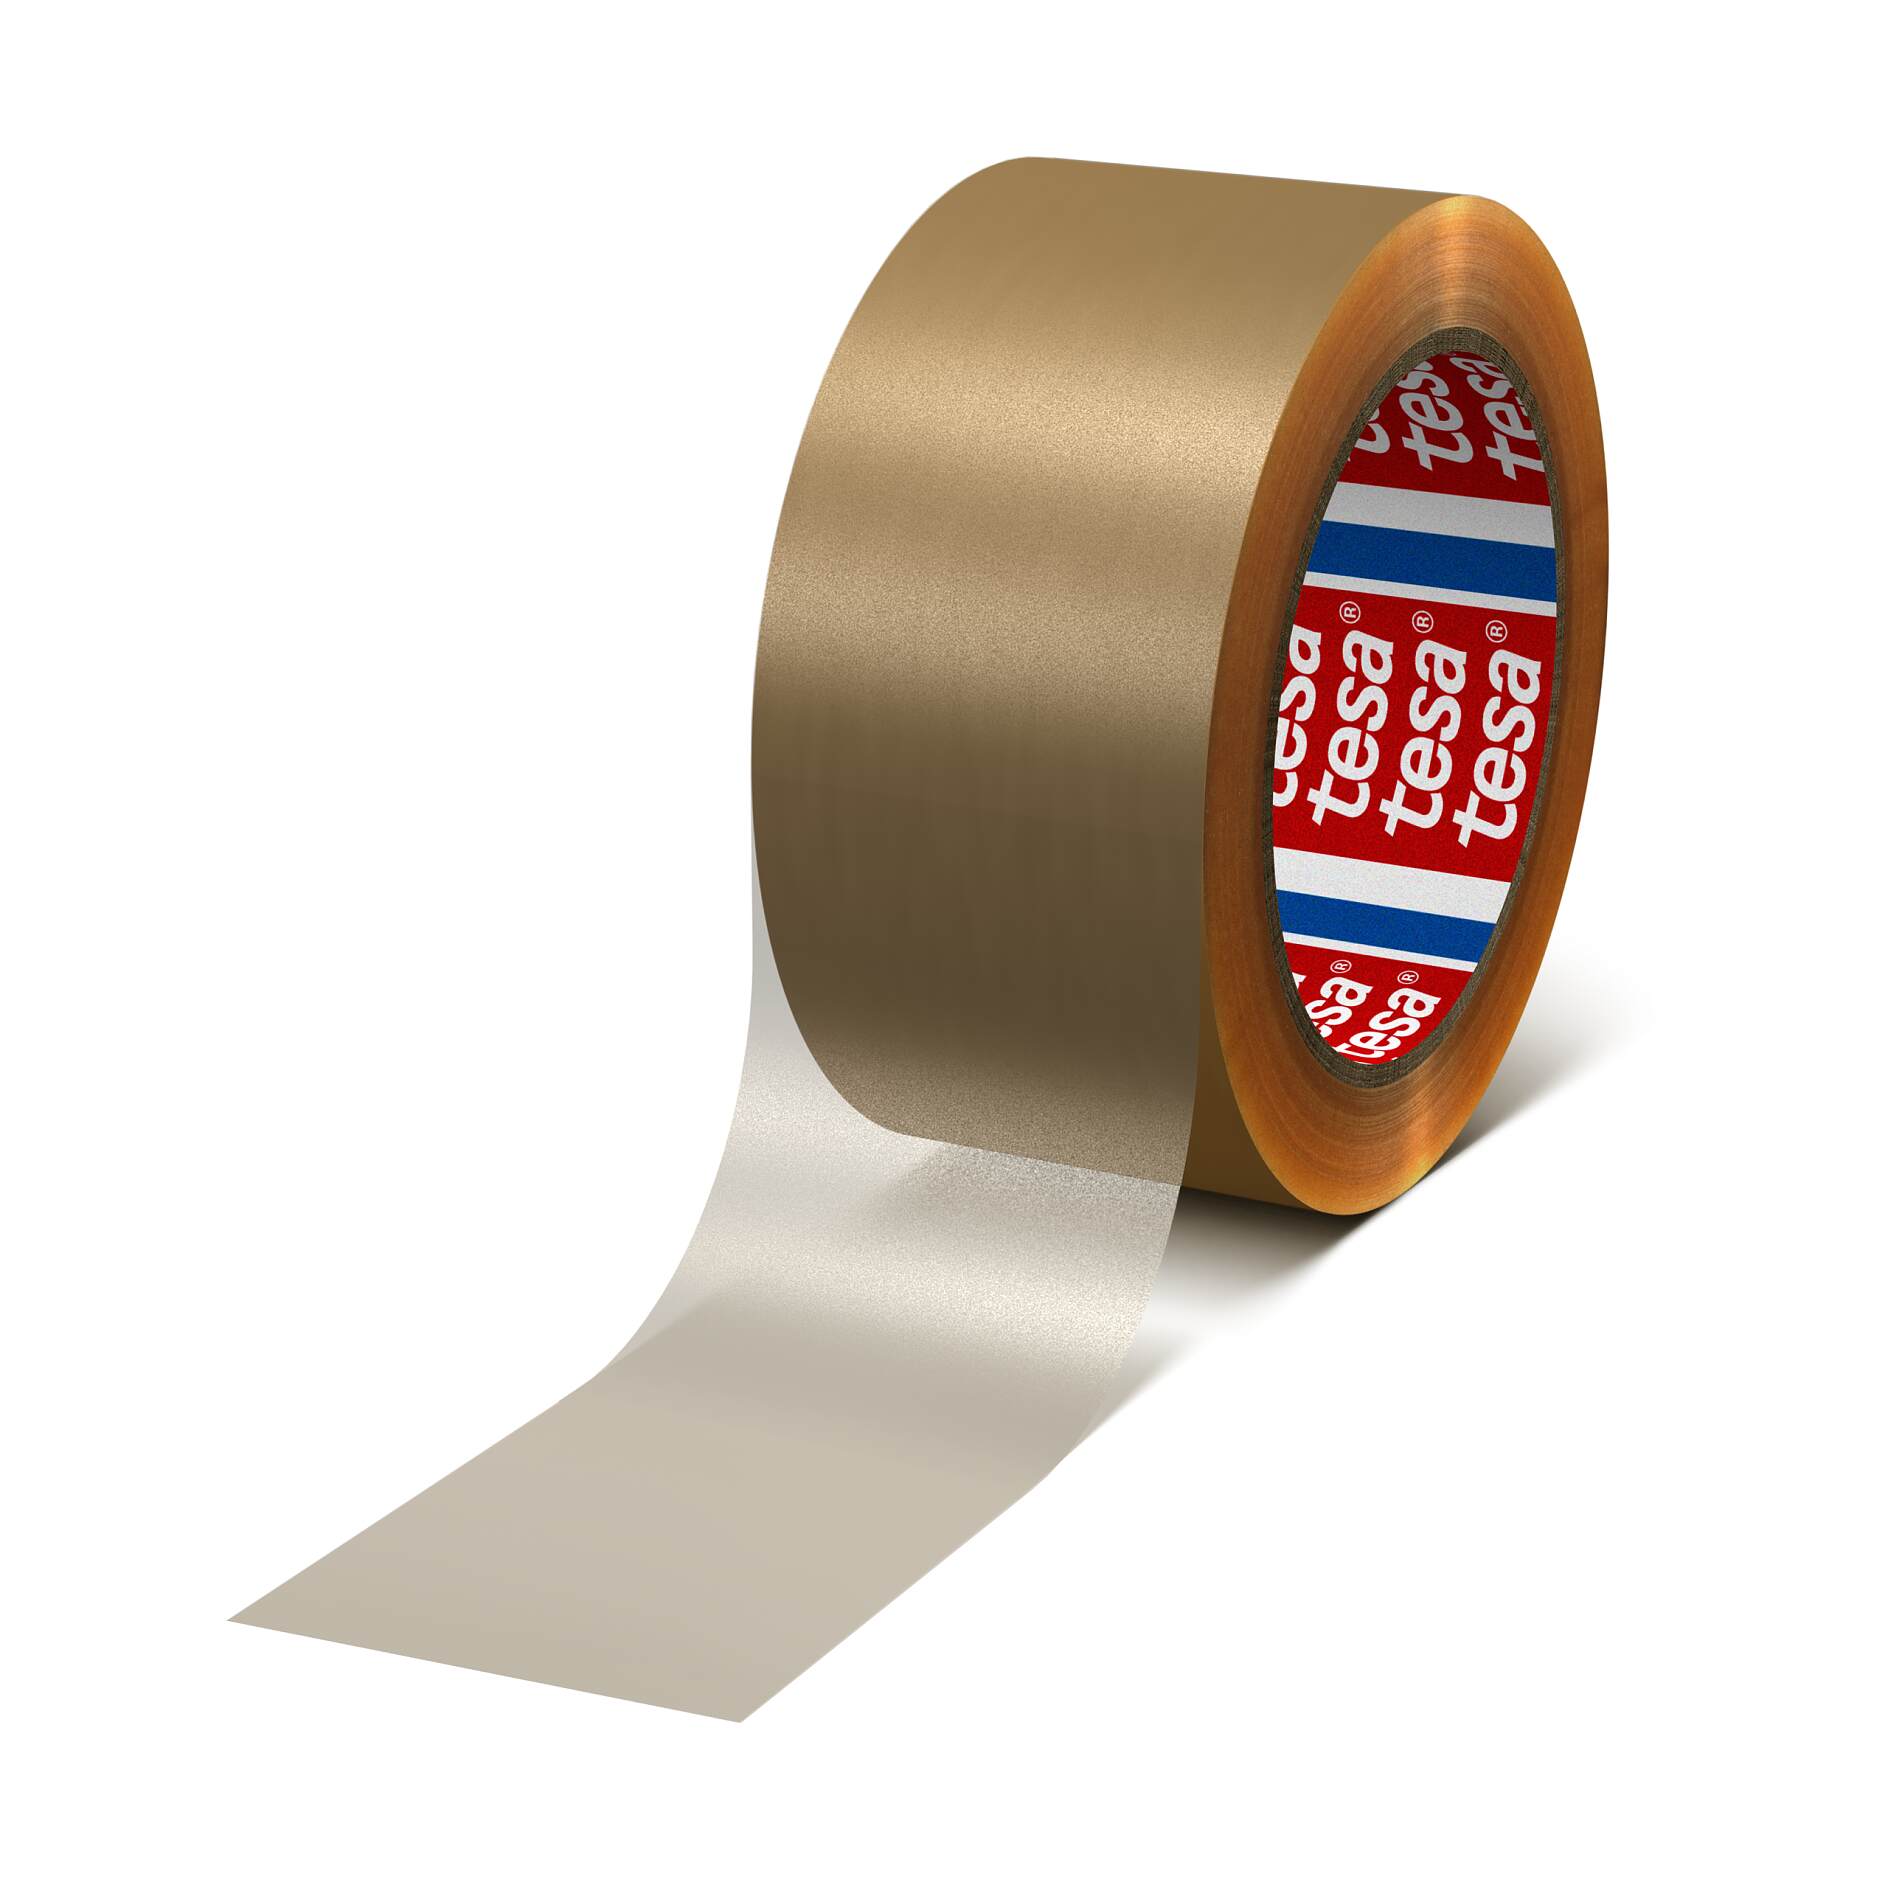 Buy Strong Efficient Authentic tesa masking tape 